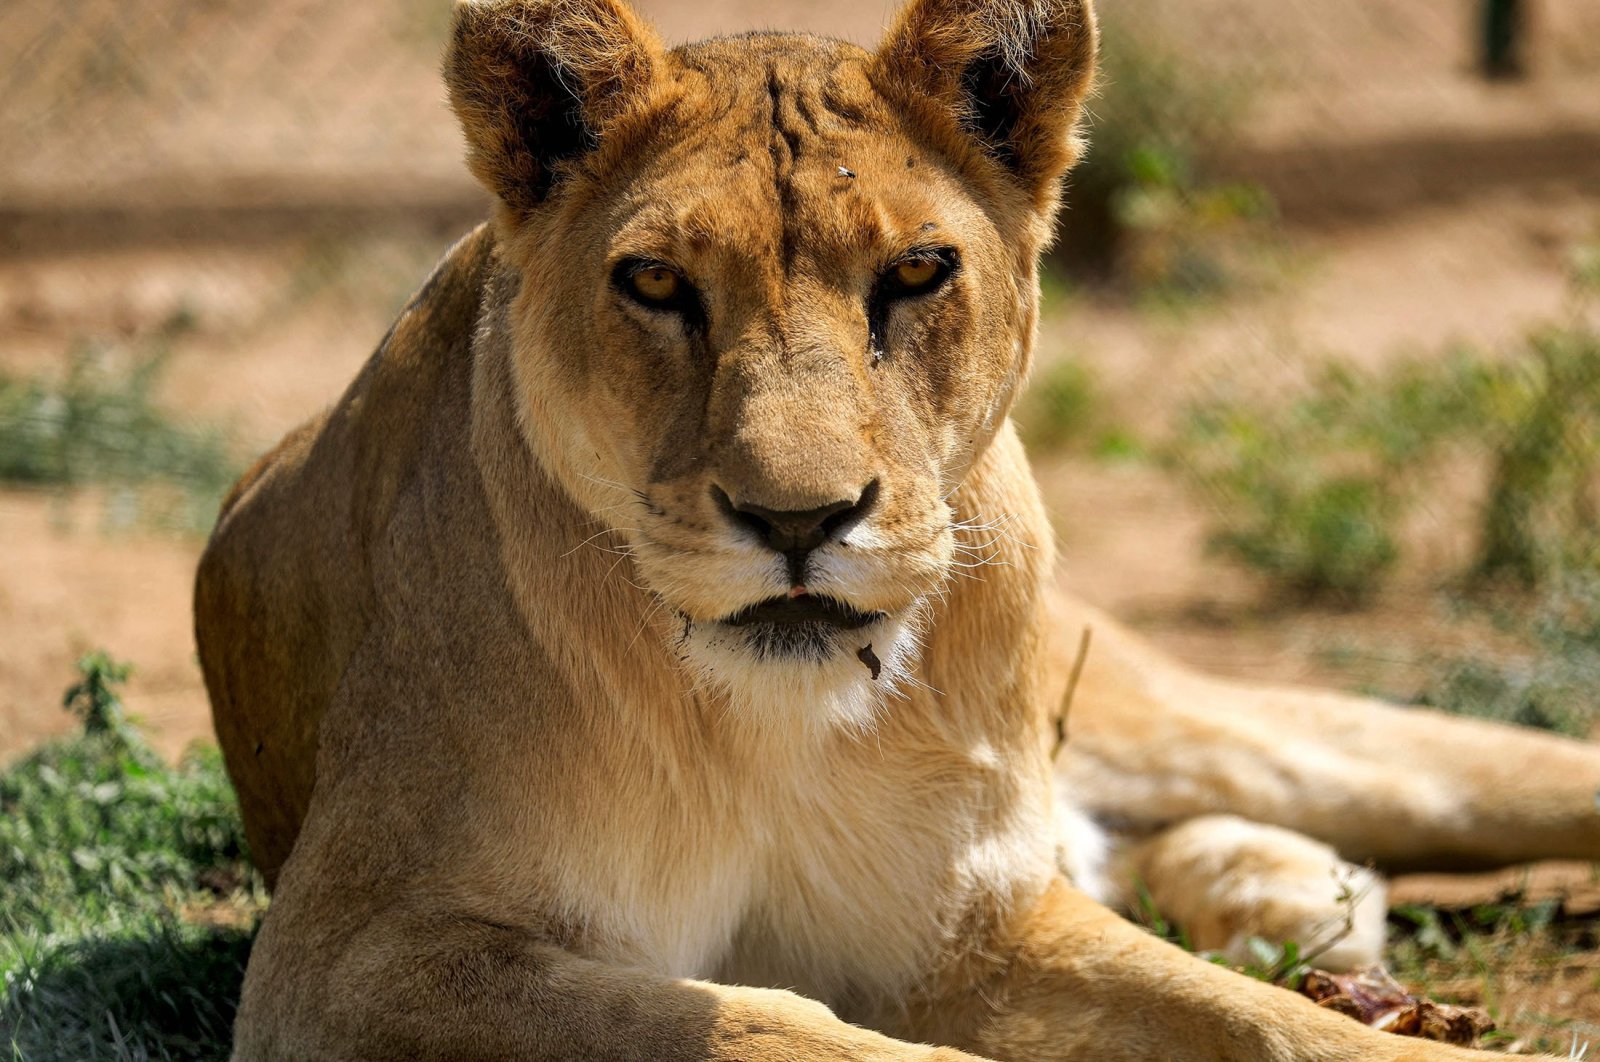 A lioness looks on in an enclosure at the Sudan Animal Rescue center in al-Bageir, south of the capital Khartoum, Sudan, Feb. 28, 2022. (AFP Photo)